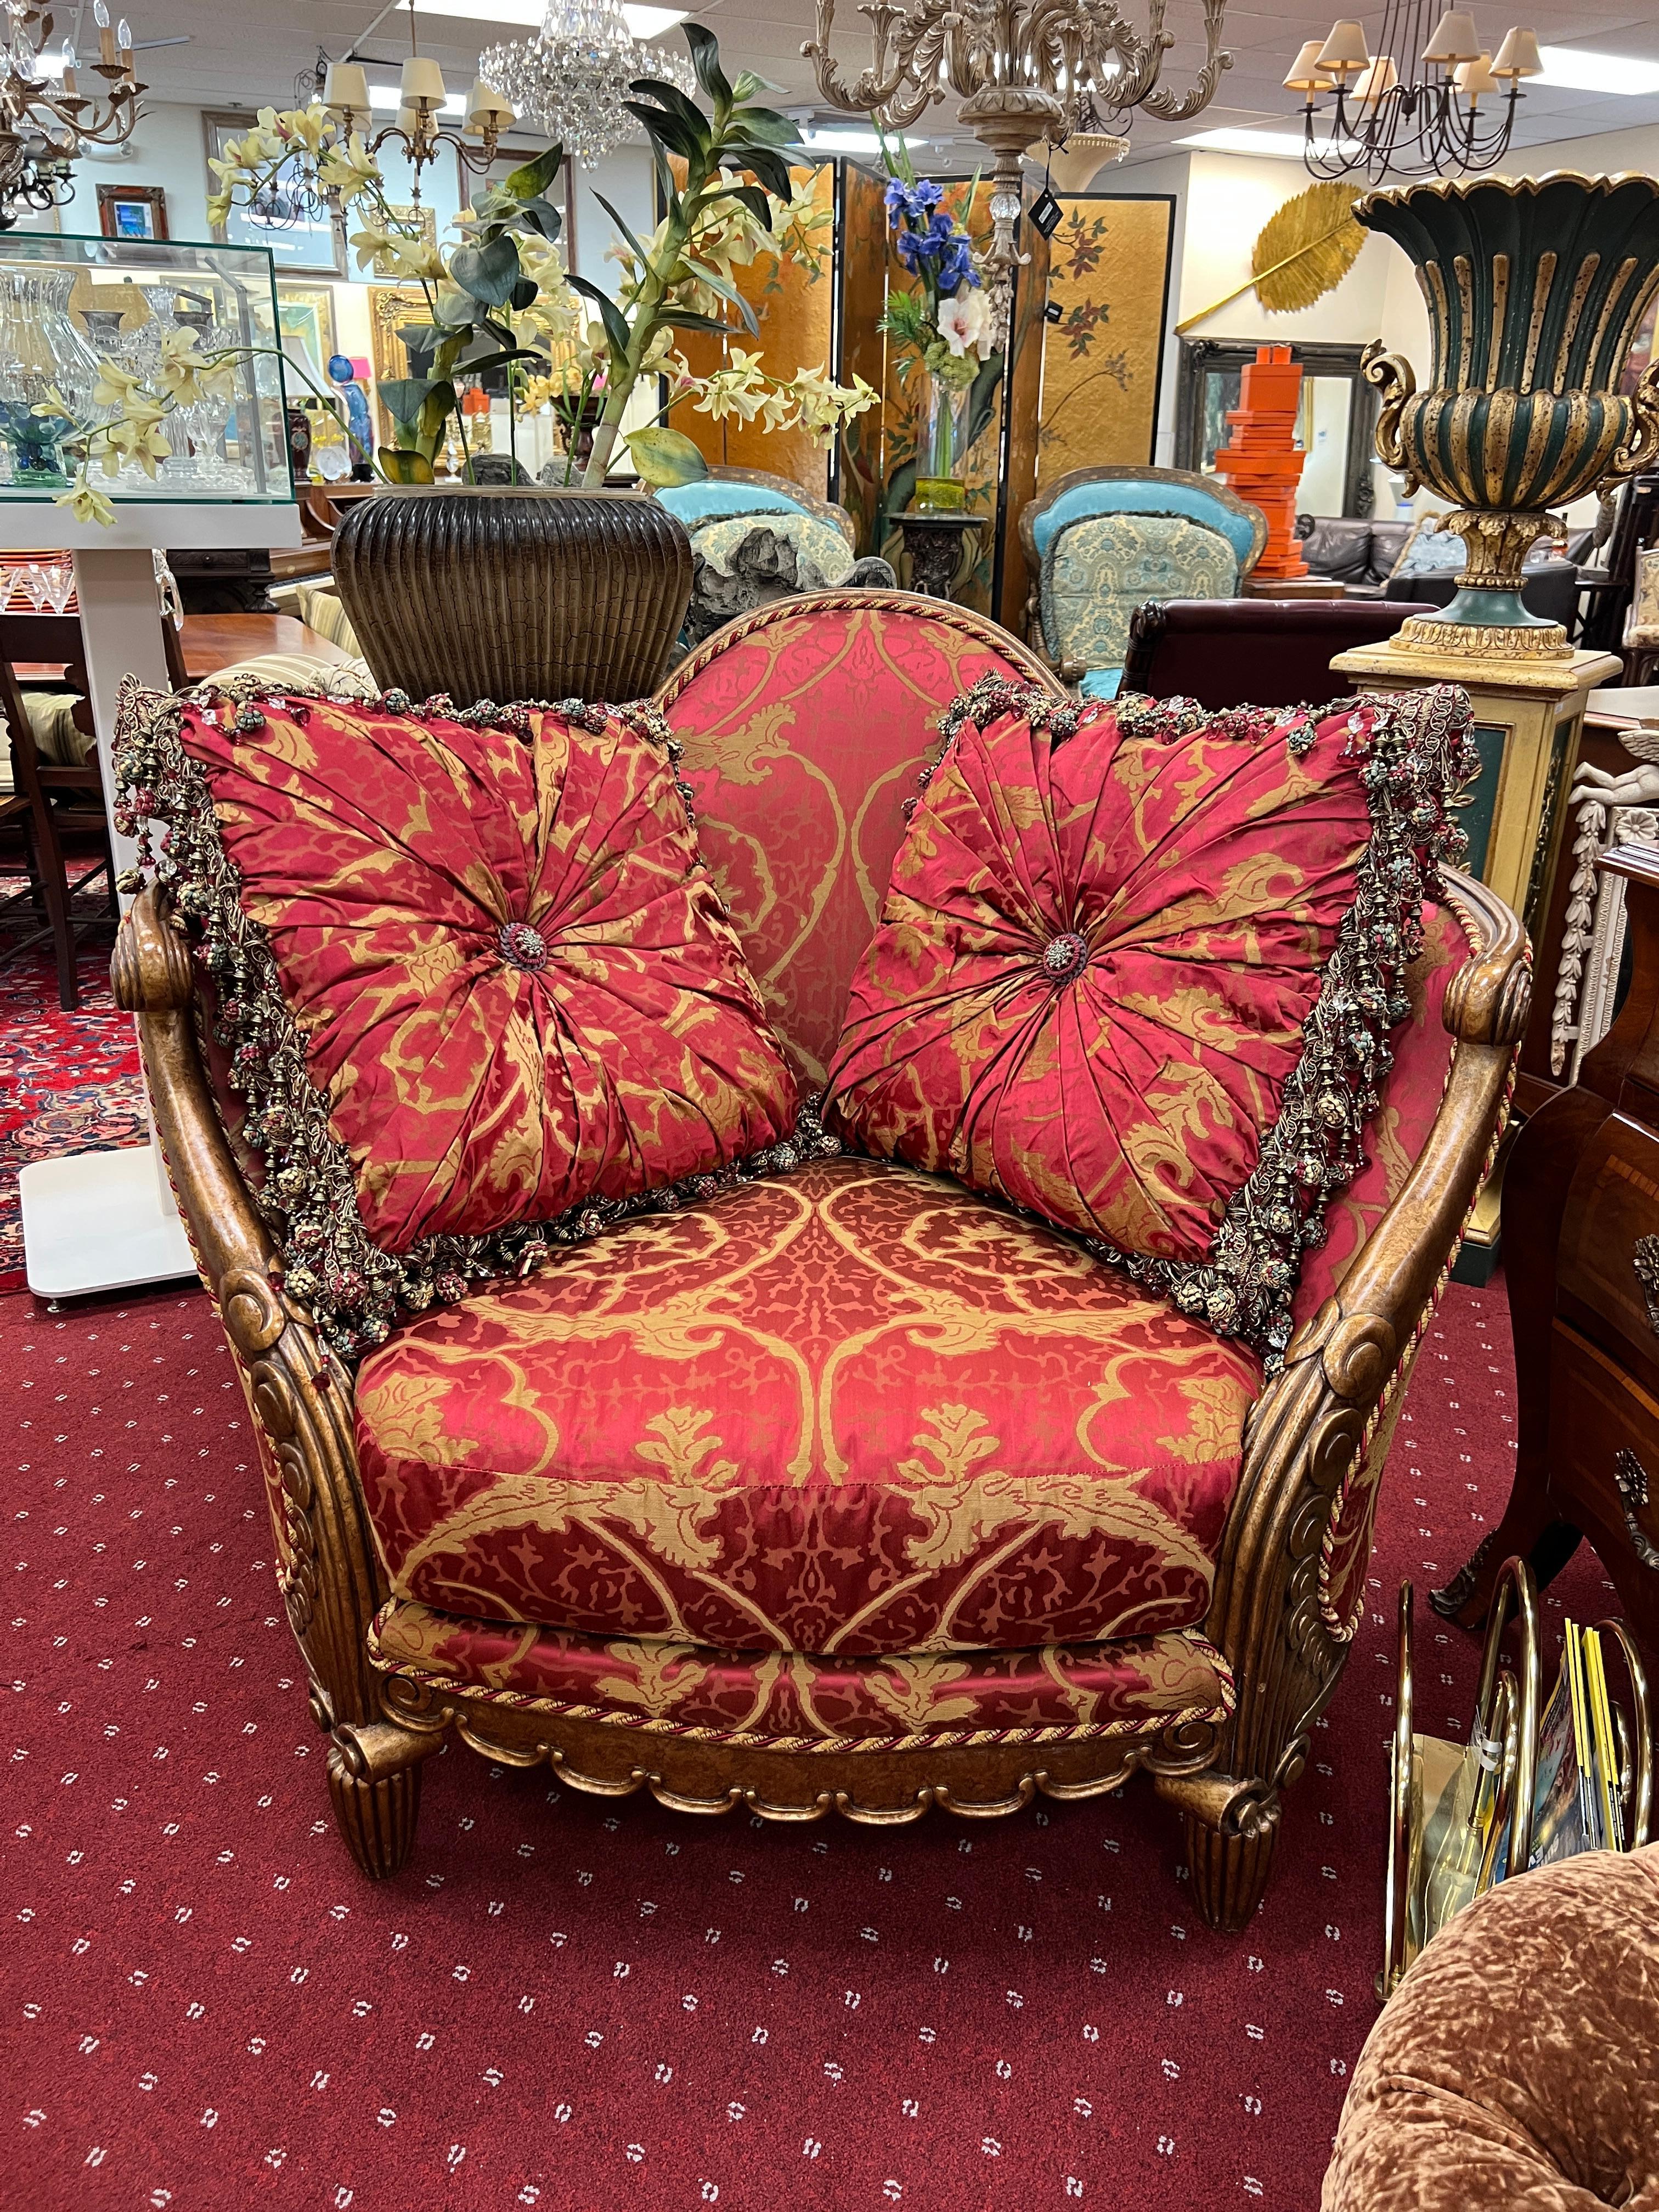 An amazing oversized lounge chair by Tomlinson, upholstered in a pinkish-red damask fabric. The custom-made pillows are included, as shown. The pillow's intricate trim work showcases attention to detail and adds the finishing touch. The chair will